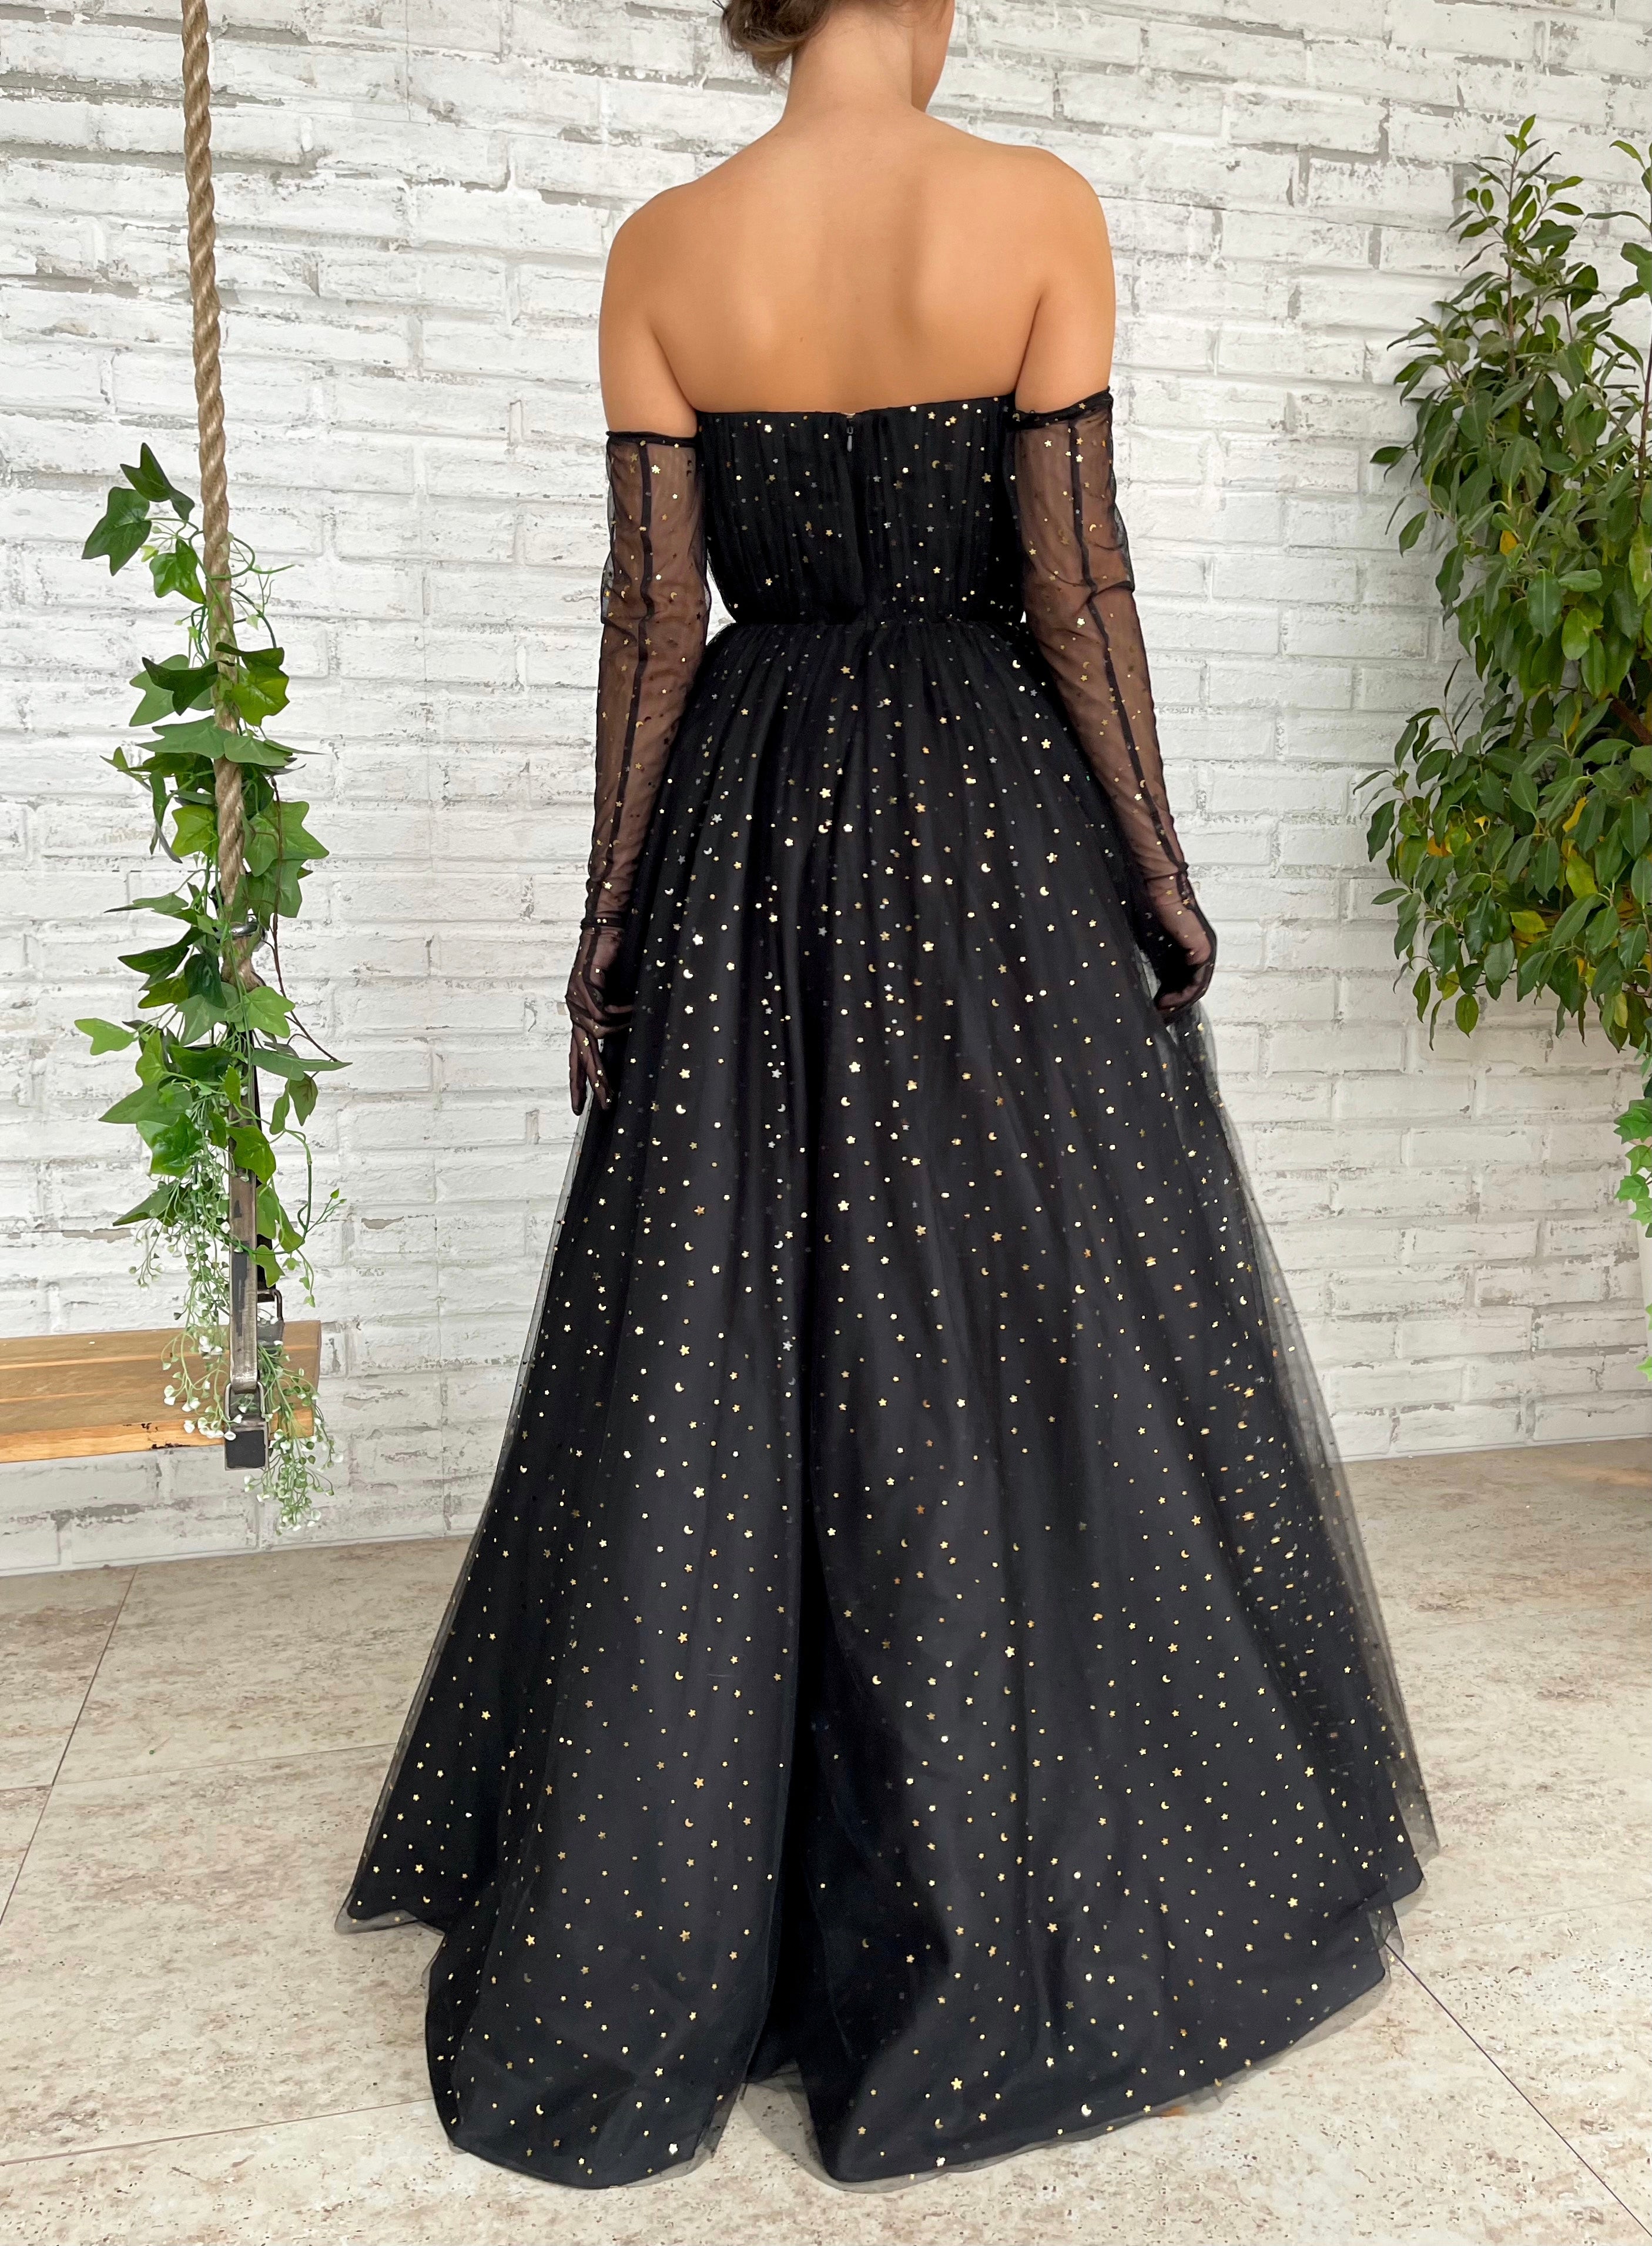 Black A-Line dress with cape sleeves, gloves and starry fabric